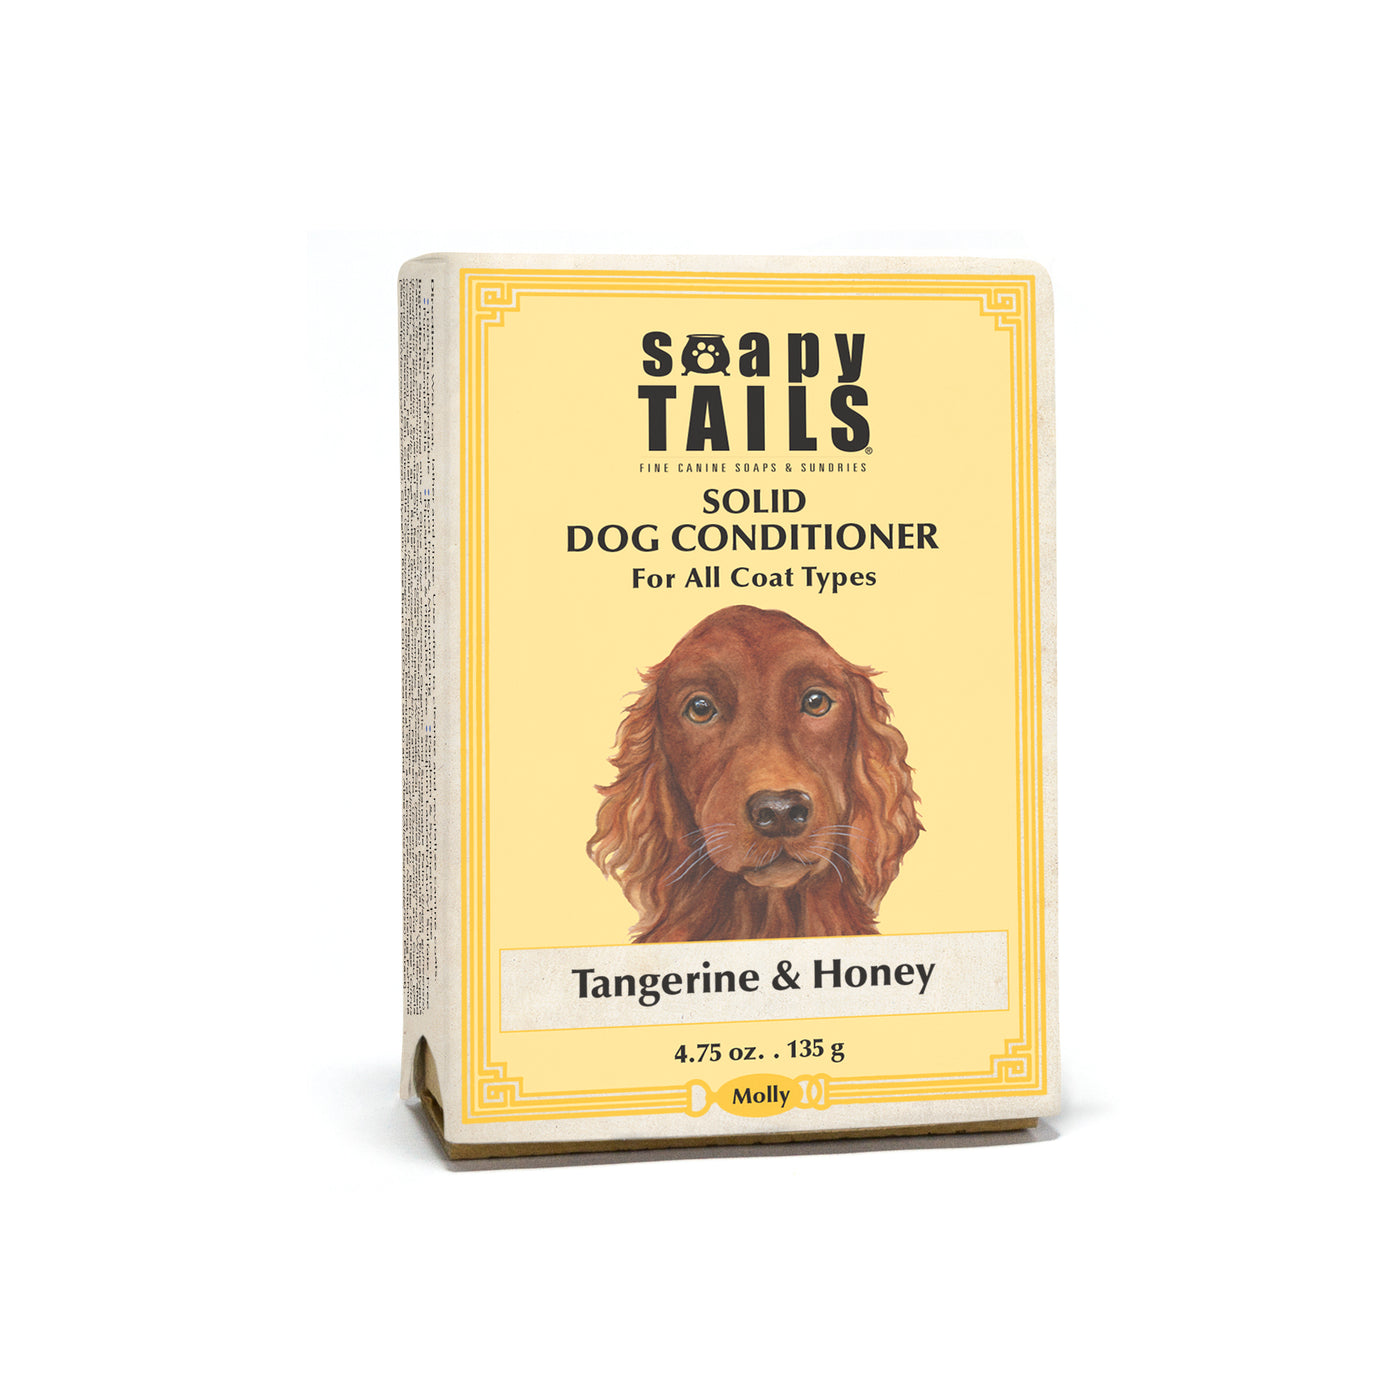 Soapy Tails Solid Dog Conditioner Bar for All Coat Types